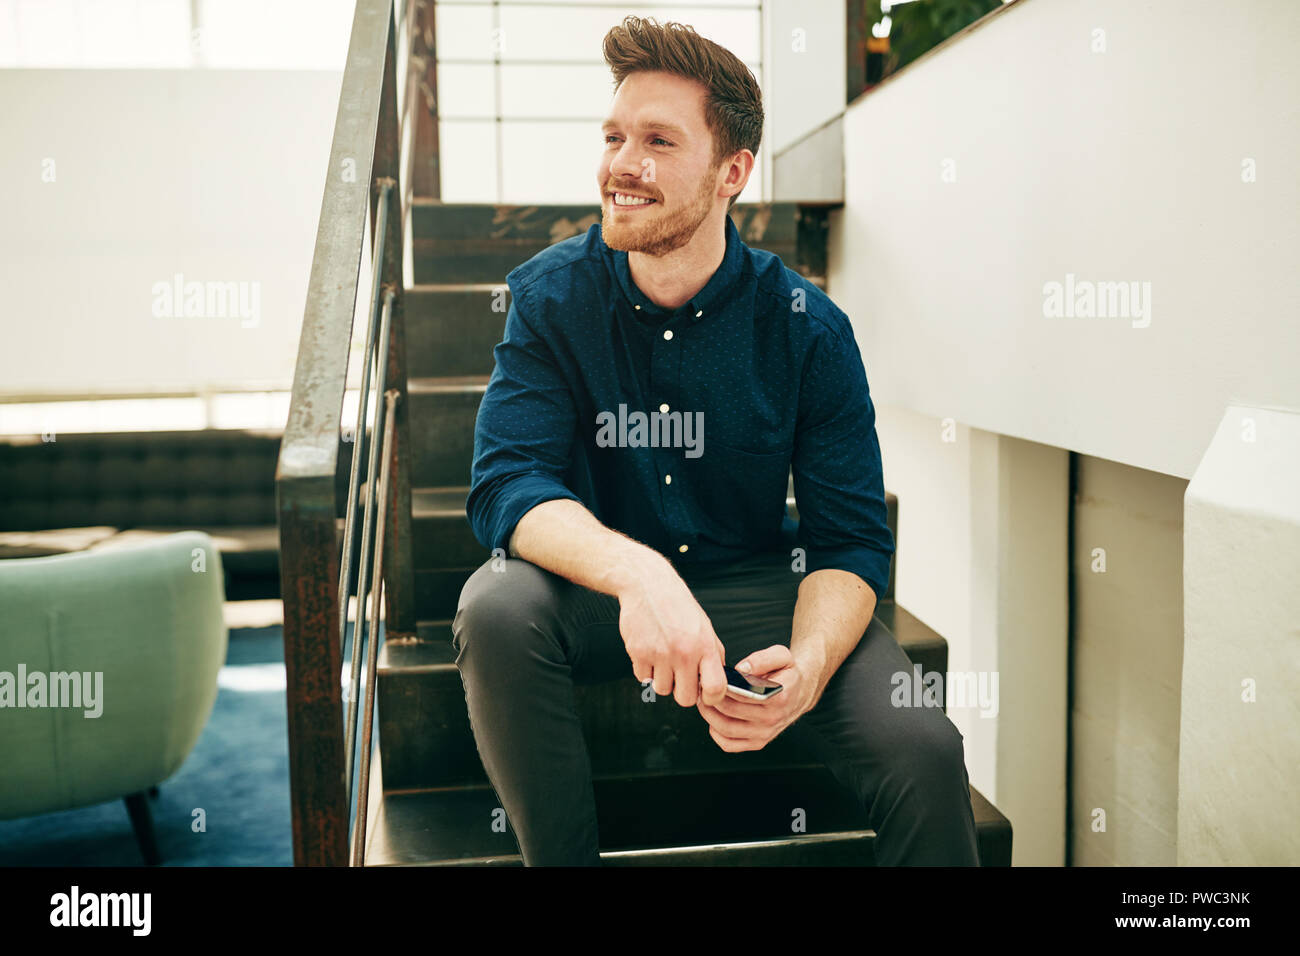 Smiling young businessman with a beard sitting alone on stairs during his break in a modern office holding a cellphone Stock Photo